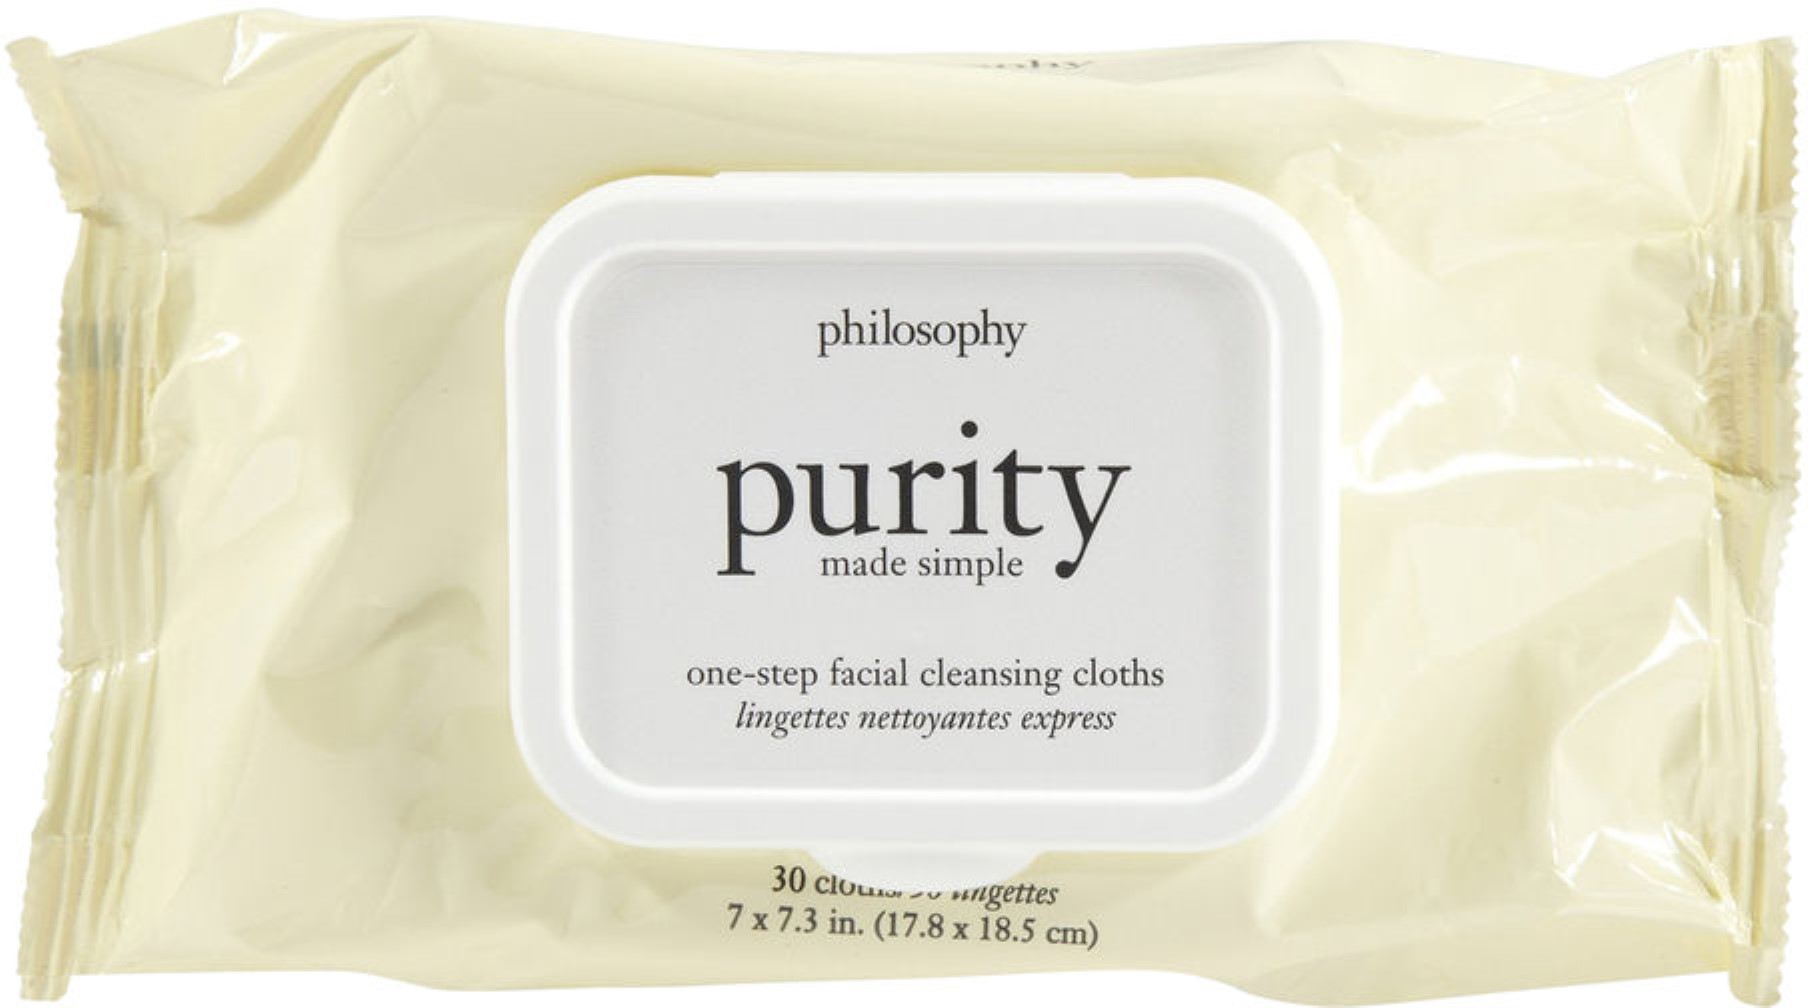 Philosophy Purity Made Simple Facial Cleansing Cloths 30 ea (Pack of 3) - image 1 of 5